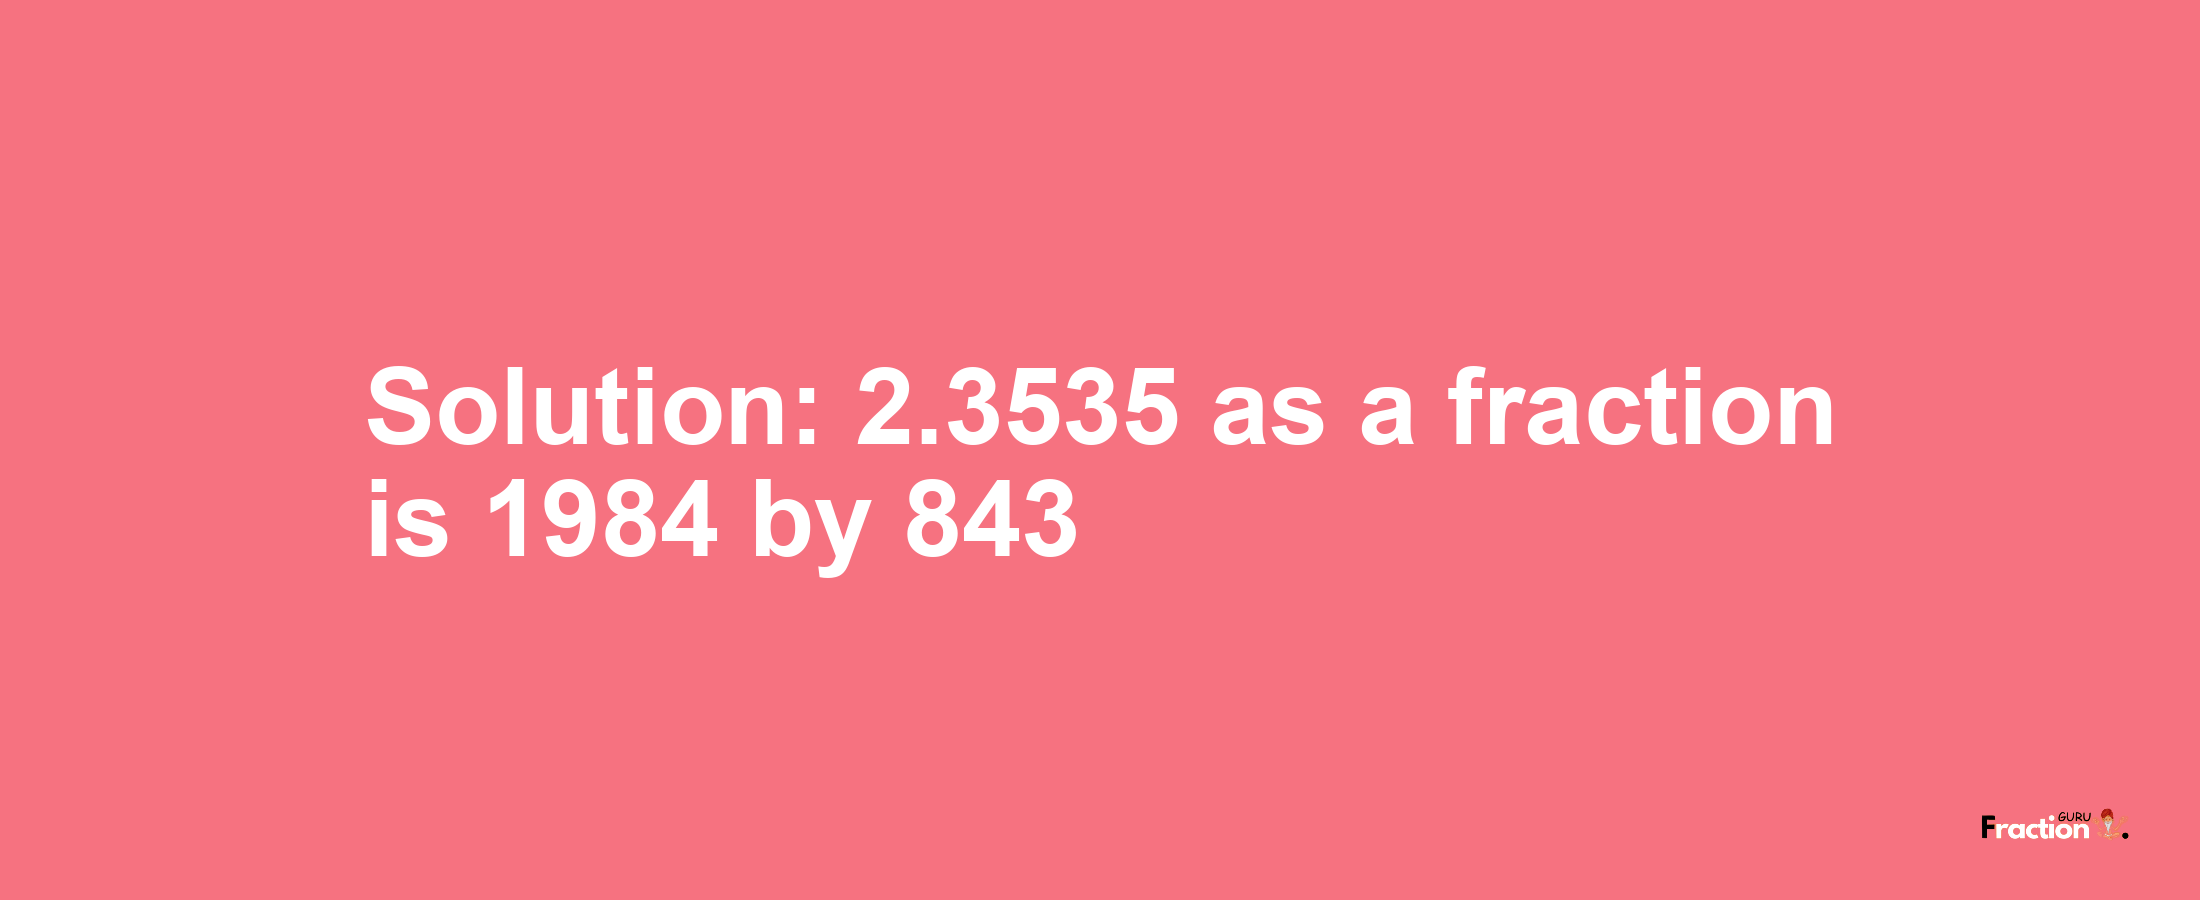 Solution:2.3535 as a fraction is 1984/843